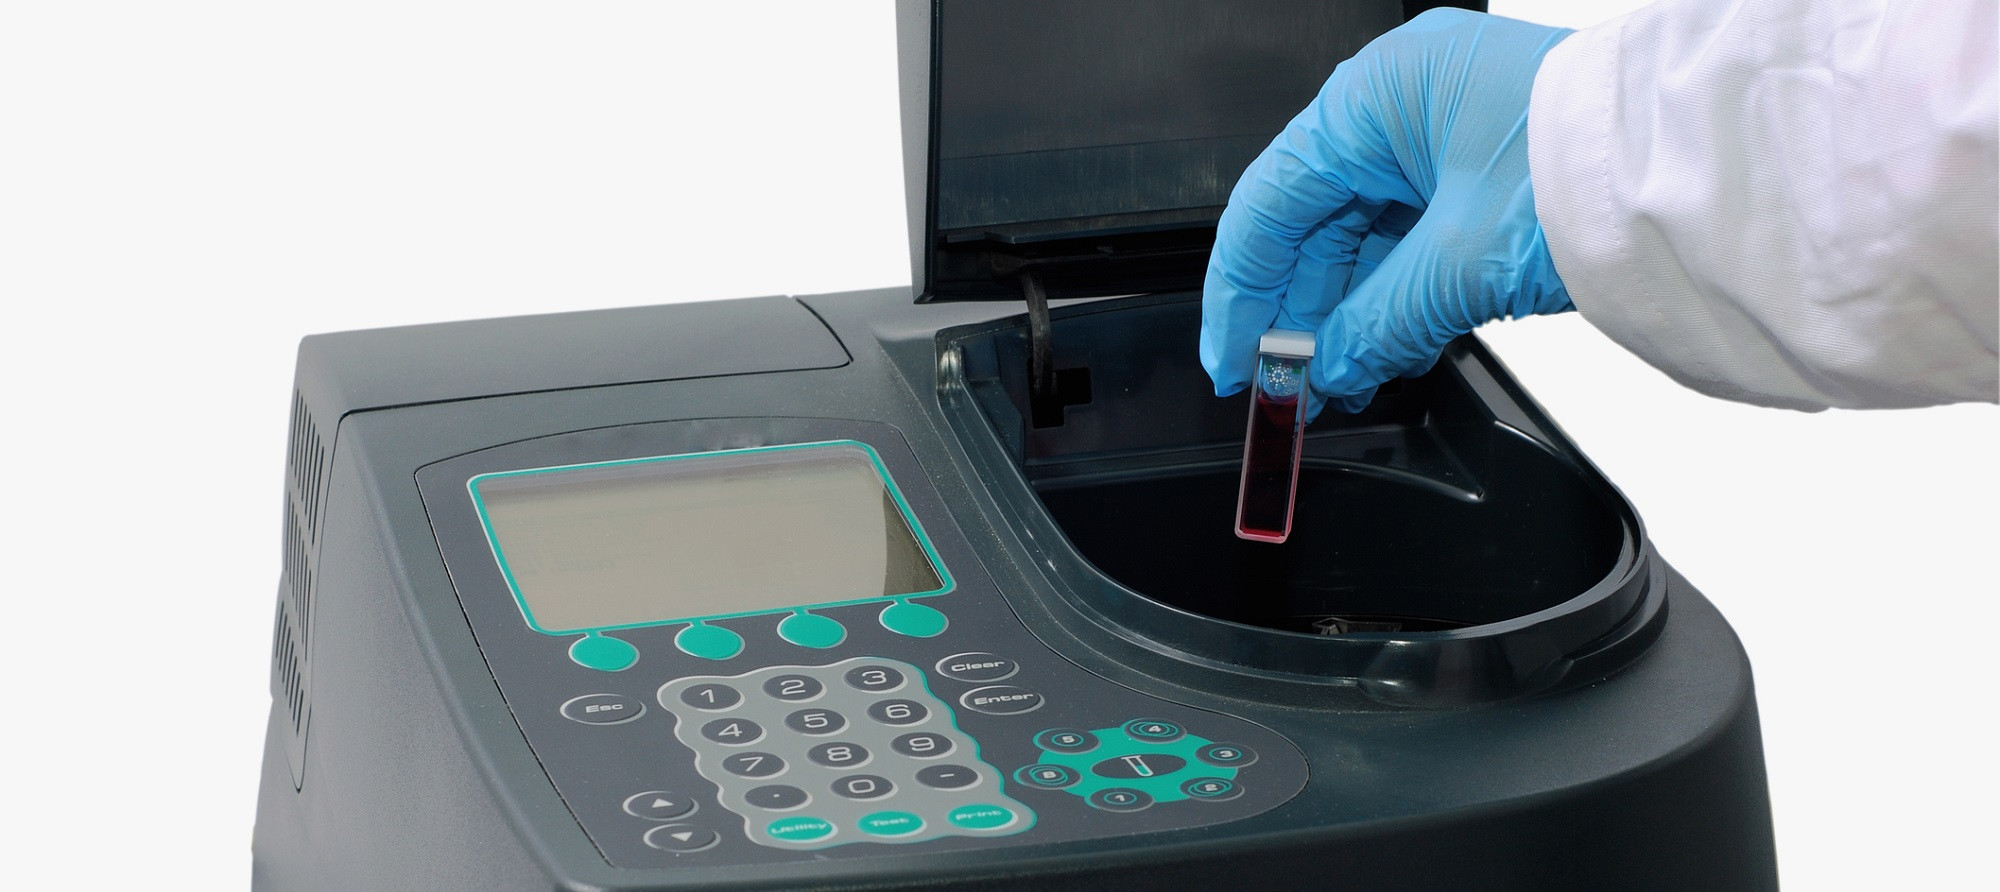 Factors to Consider When Purchasing a UV-Vis or Fluorescence Spectrophotometer